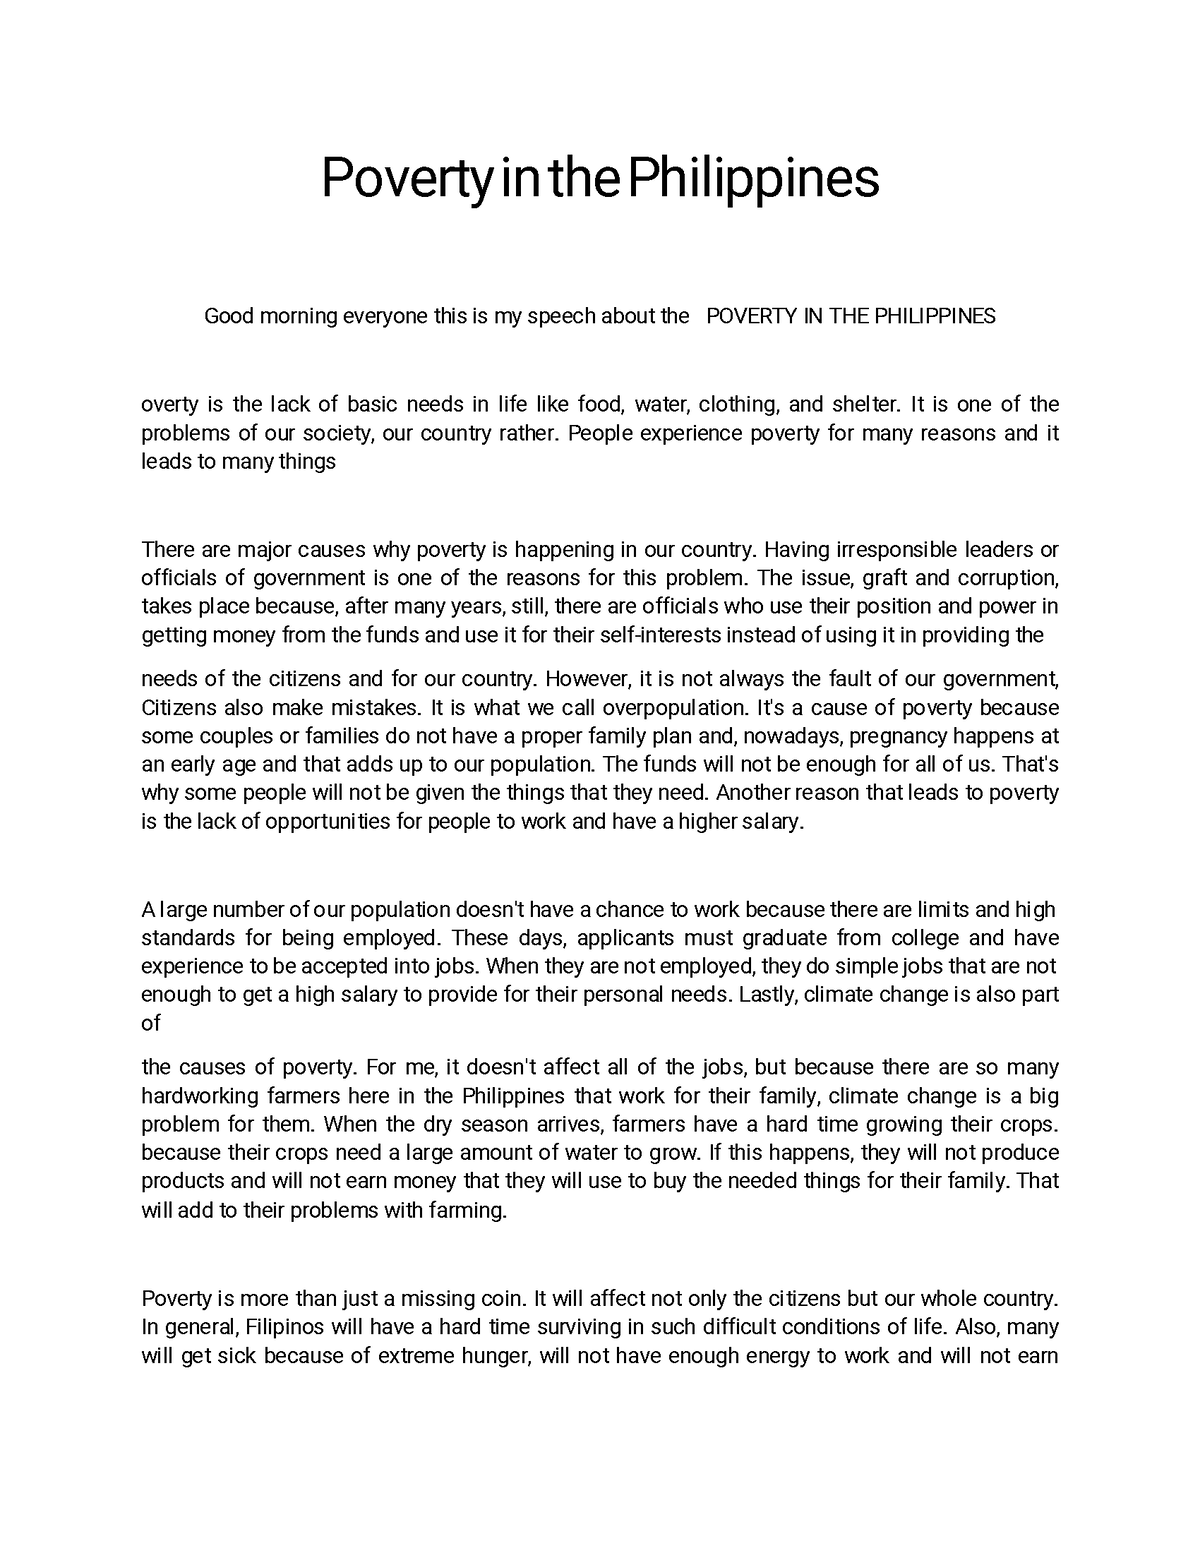 how to write speech about poverty